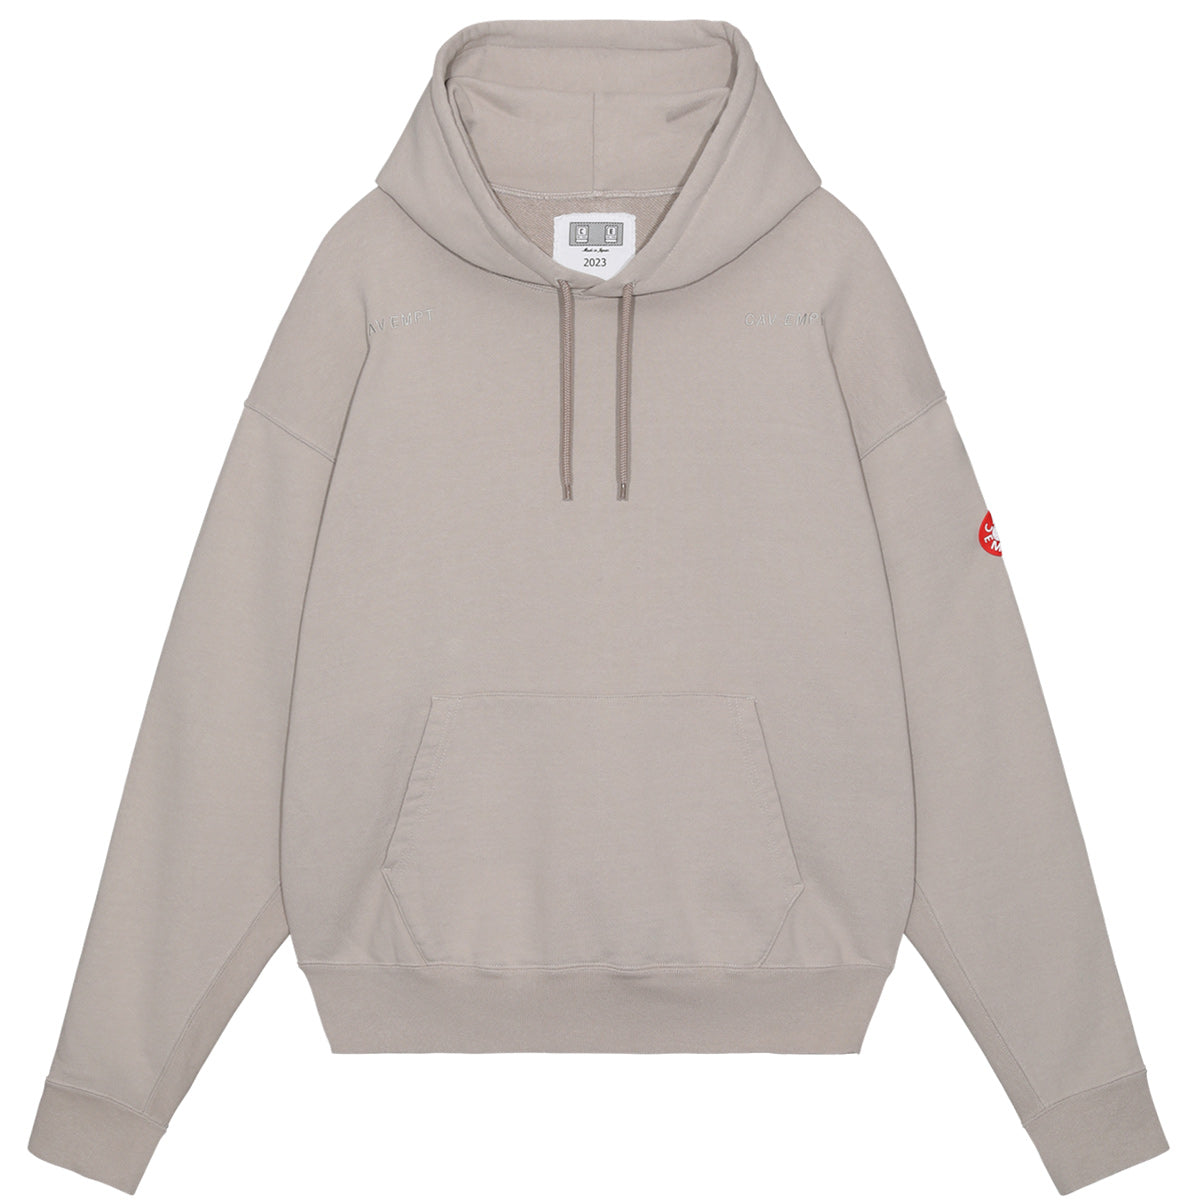 CE - RECIPROCAL HOODY hoodie | cherry online shopping site